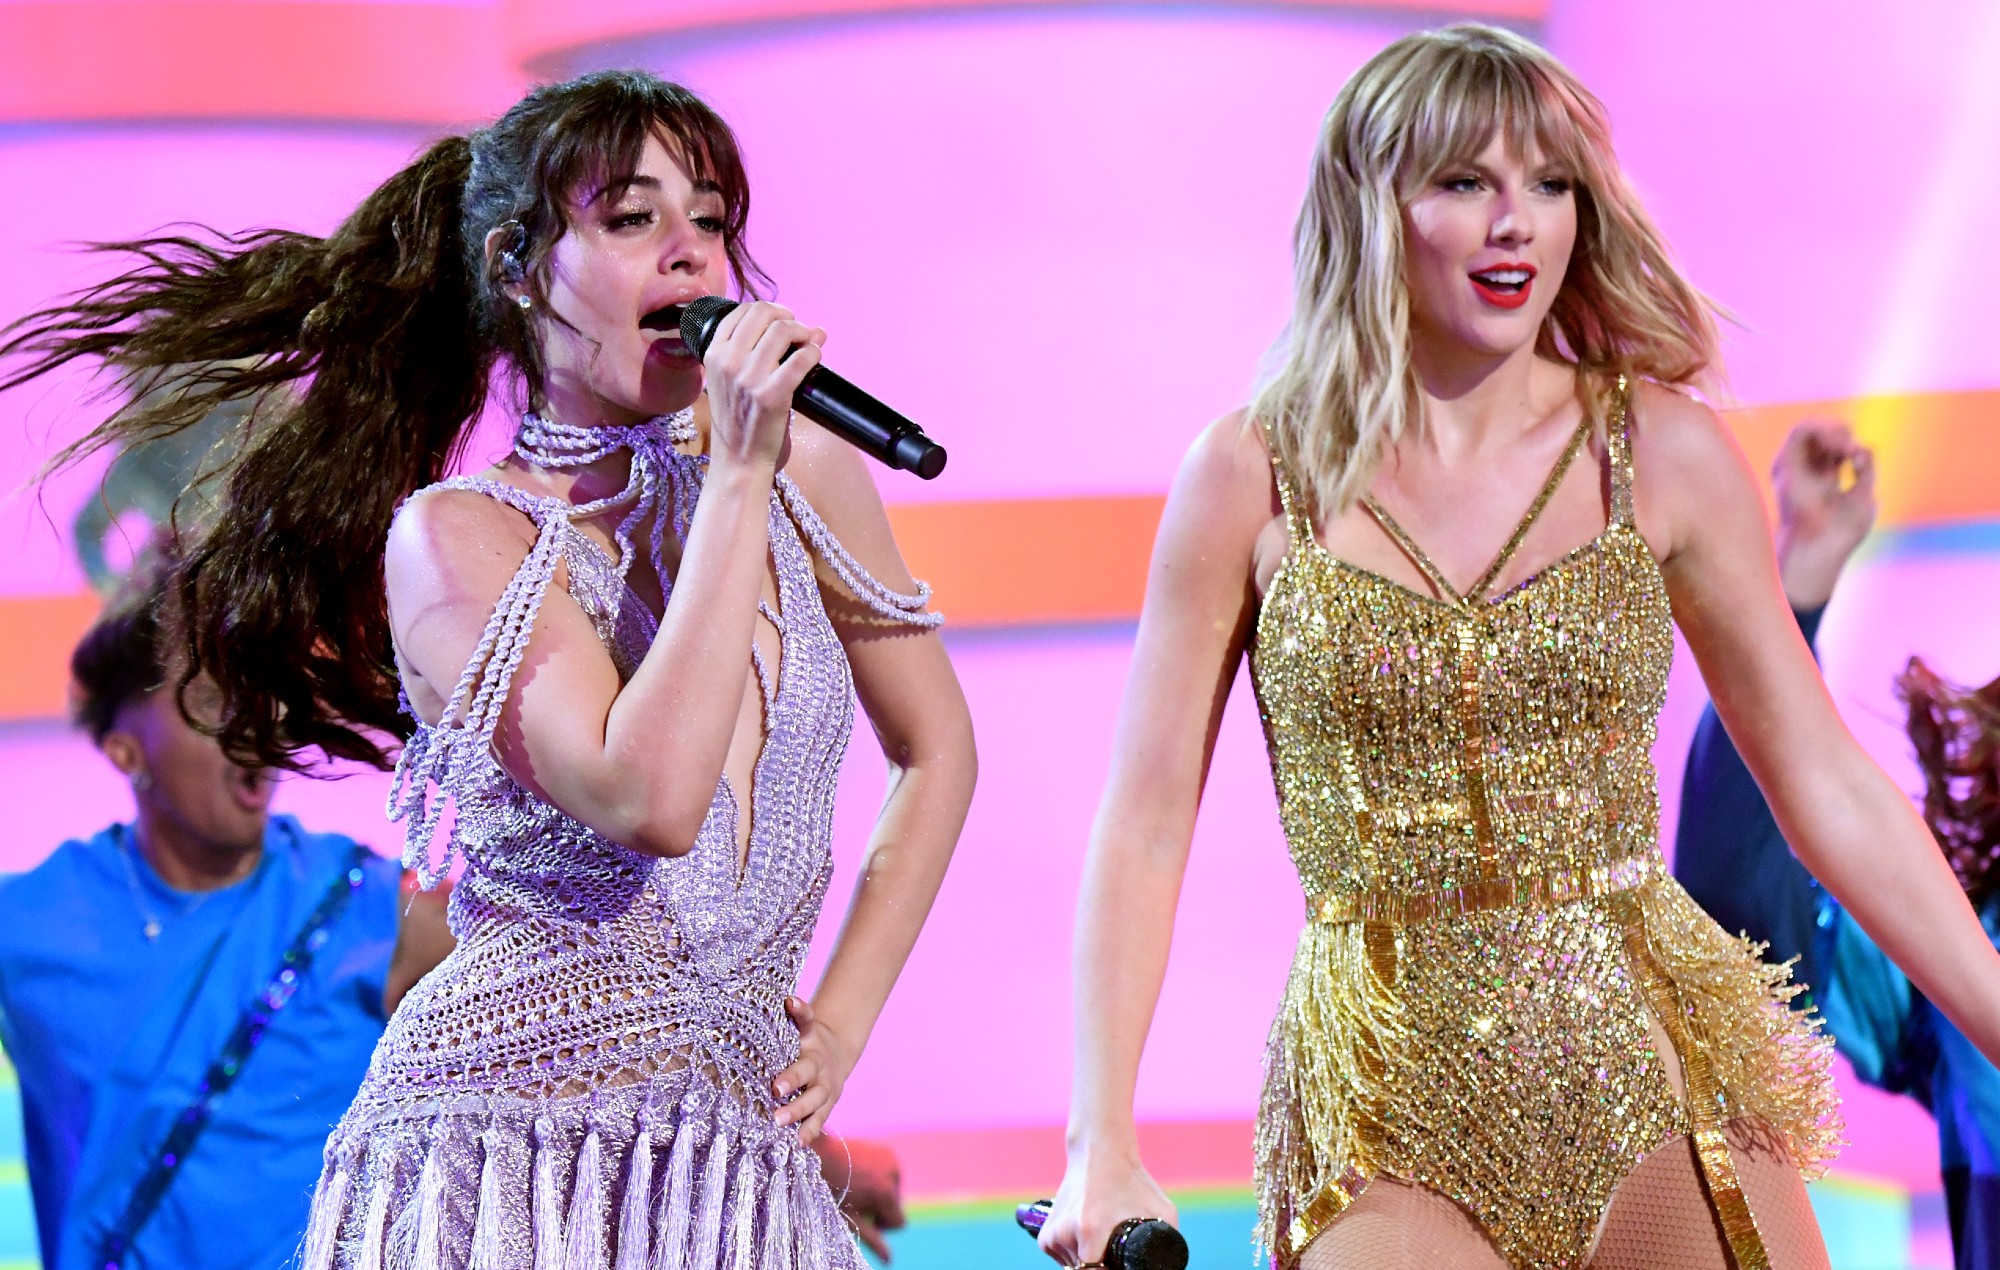 Here’s the advice Taylor Swift shared with Camila Cabello when they first met